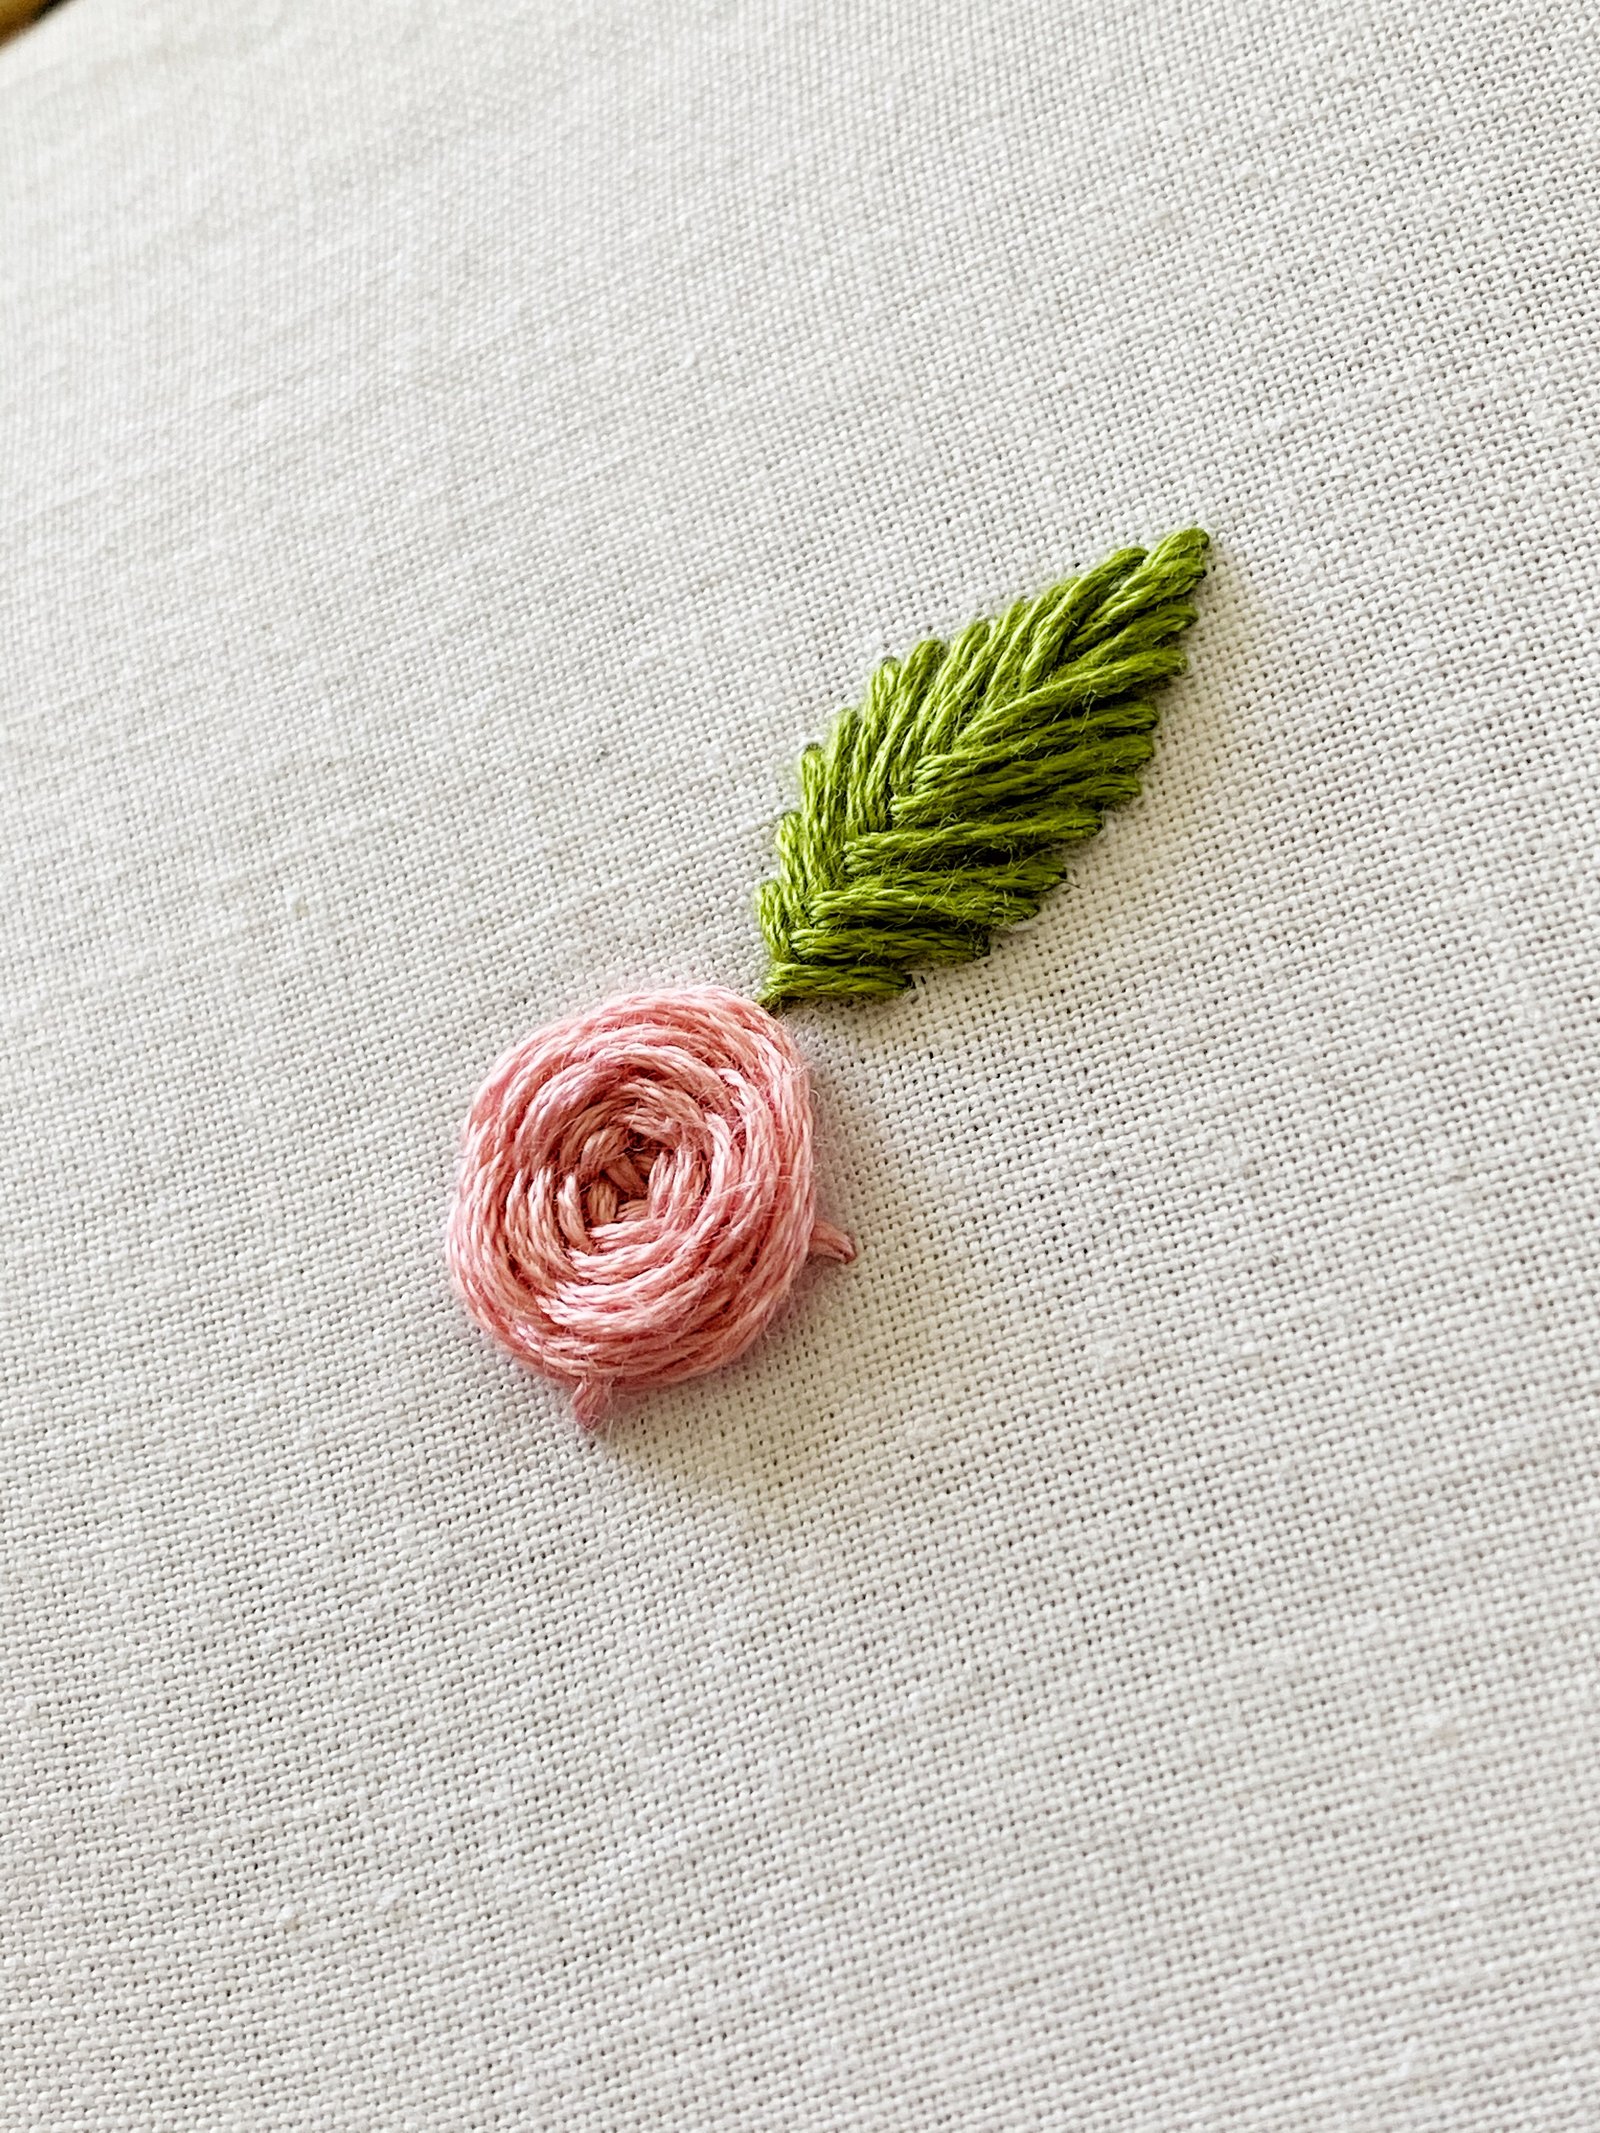 How to make a Hand Embroidery Rose, Beginner Friendly - Missy Kate Creations